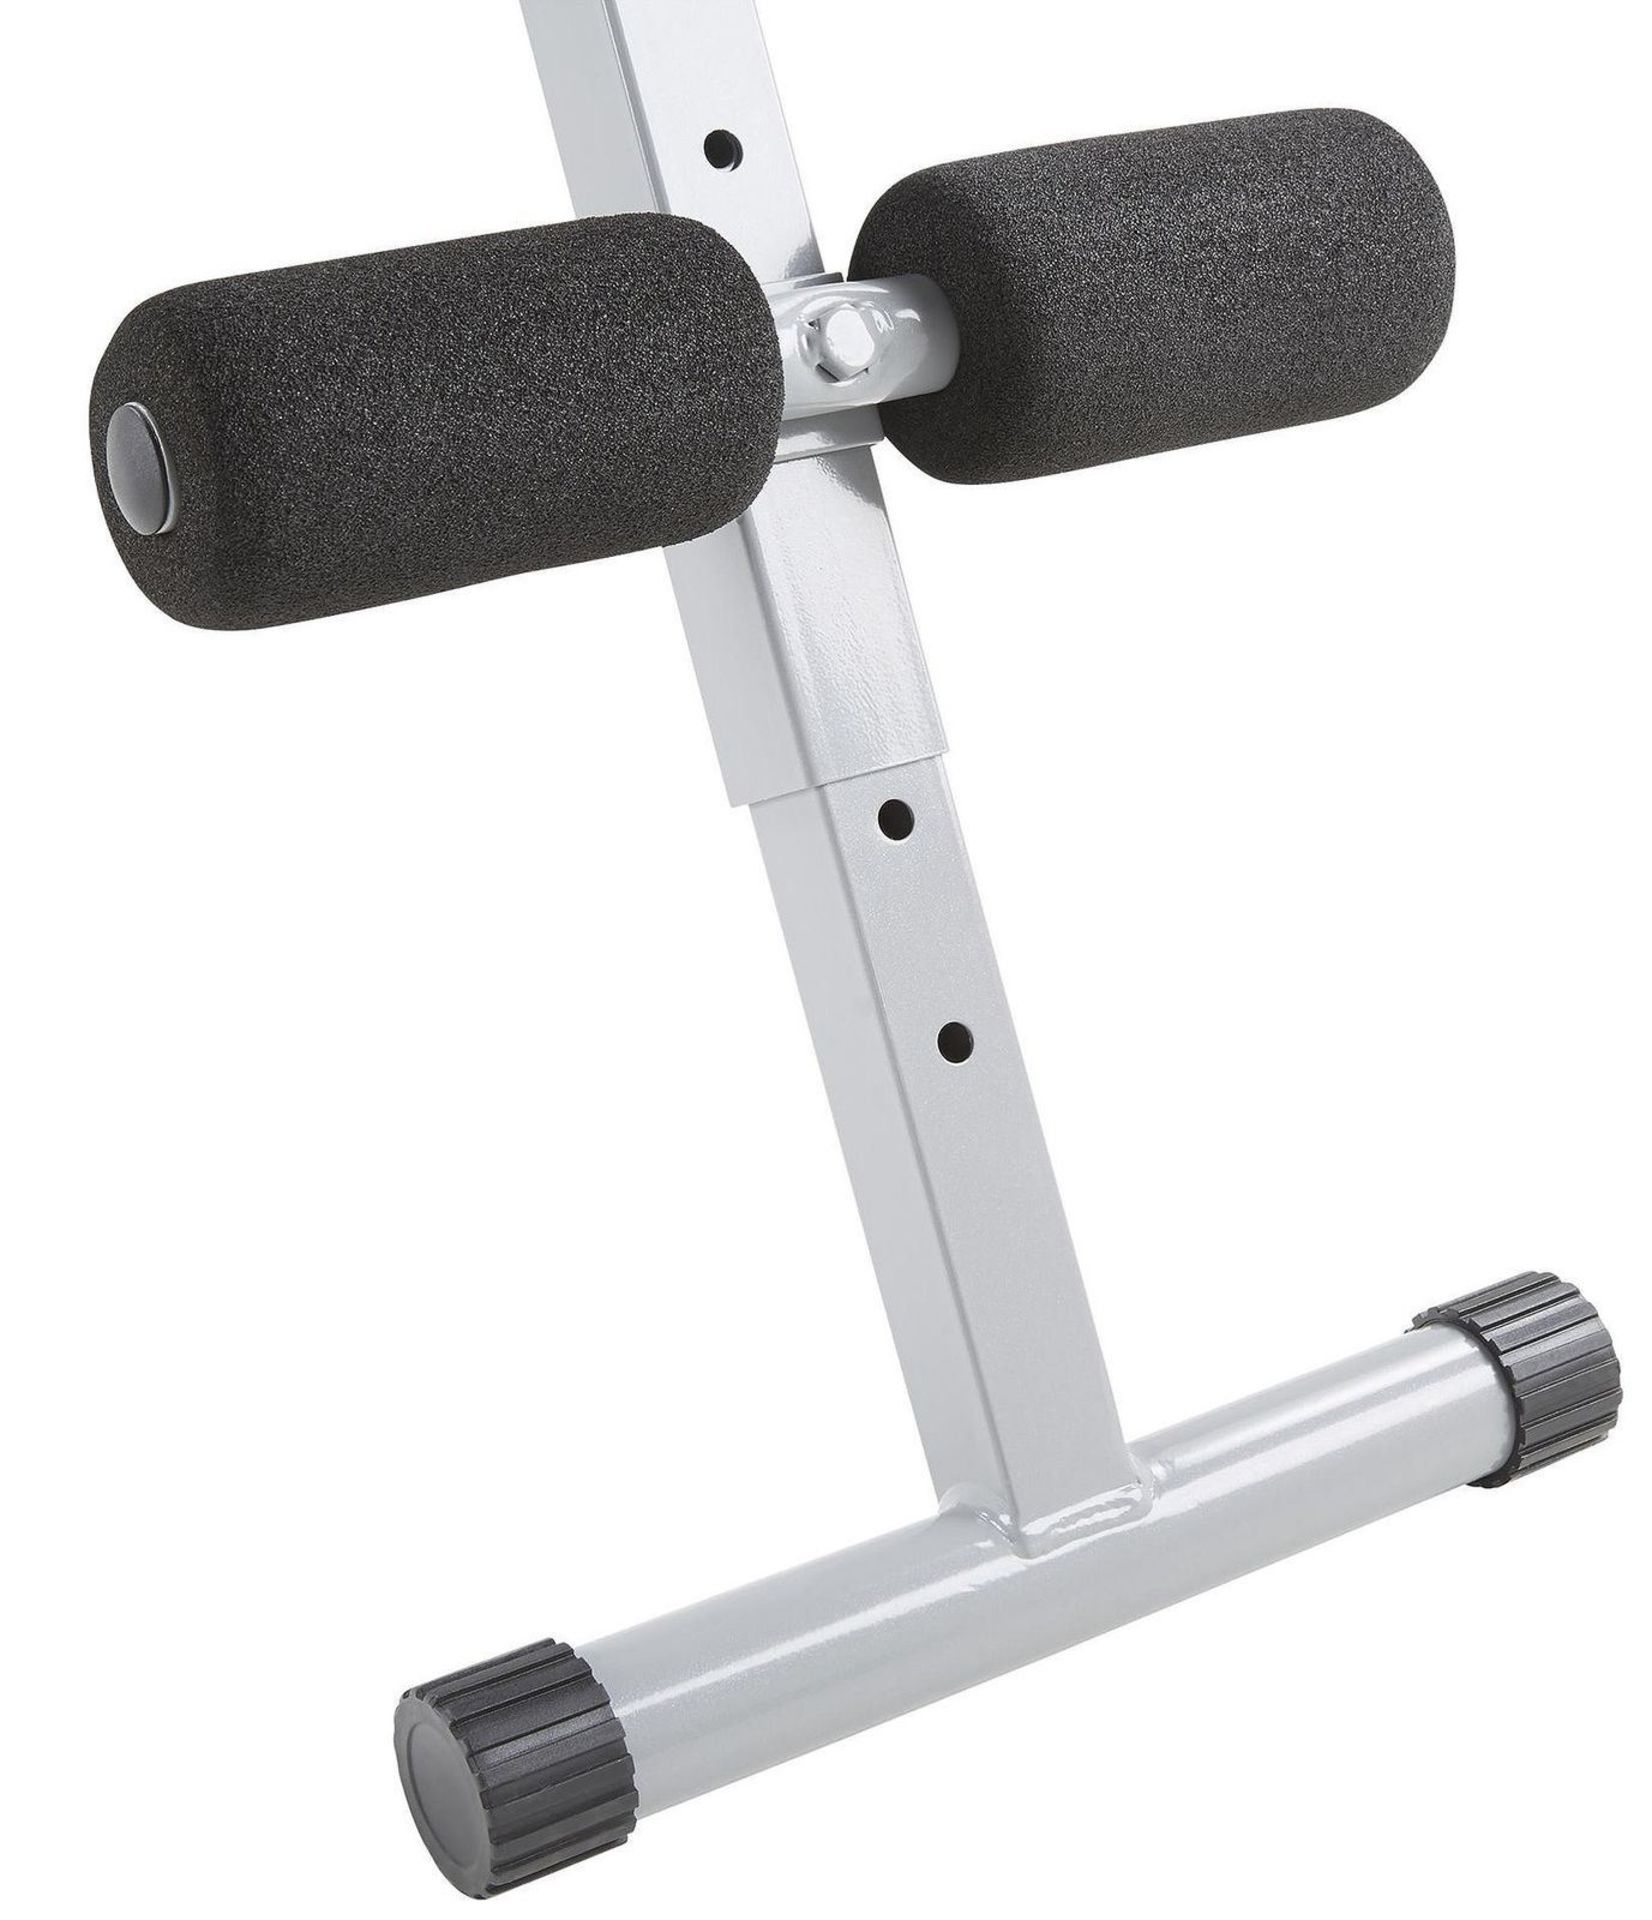 V Brand New 2 in 1 Incline/Sit Up Bench - Tesco Price £35.00 - Image 3 of 3